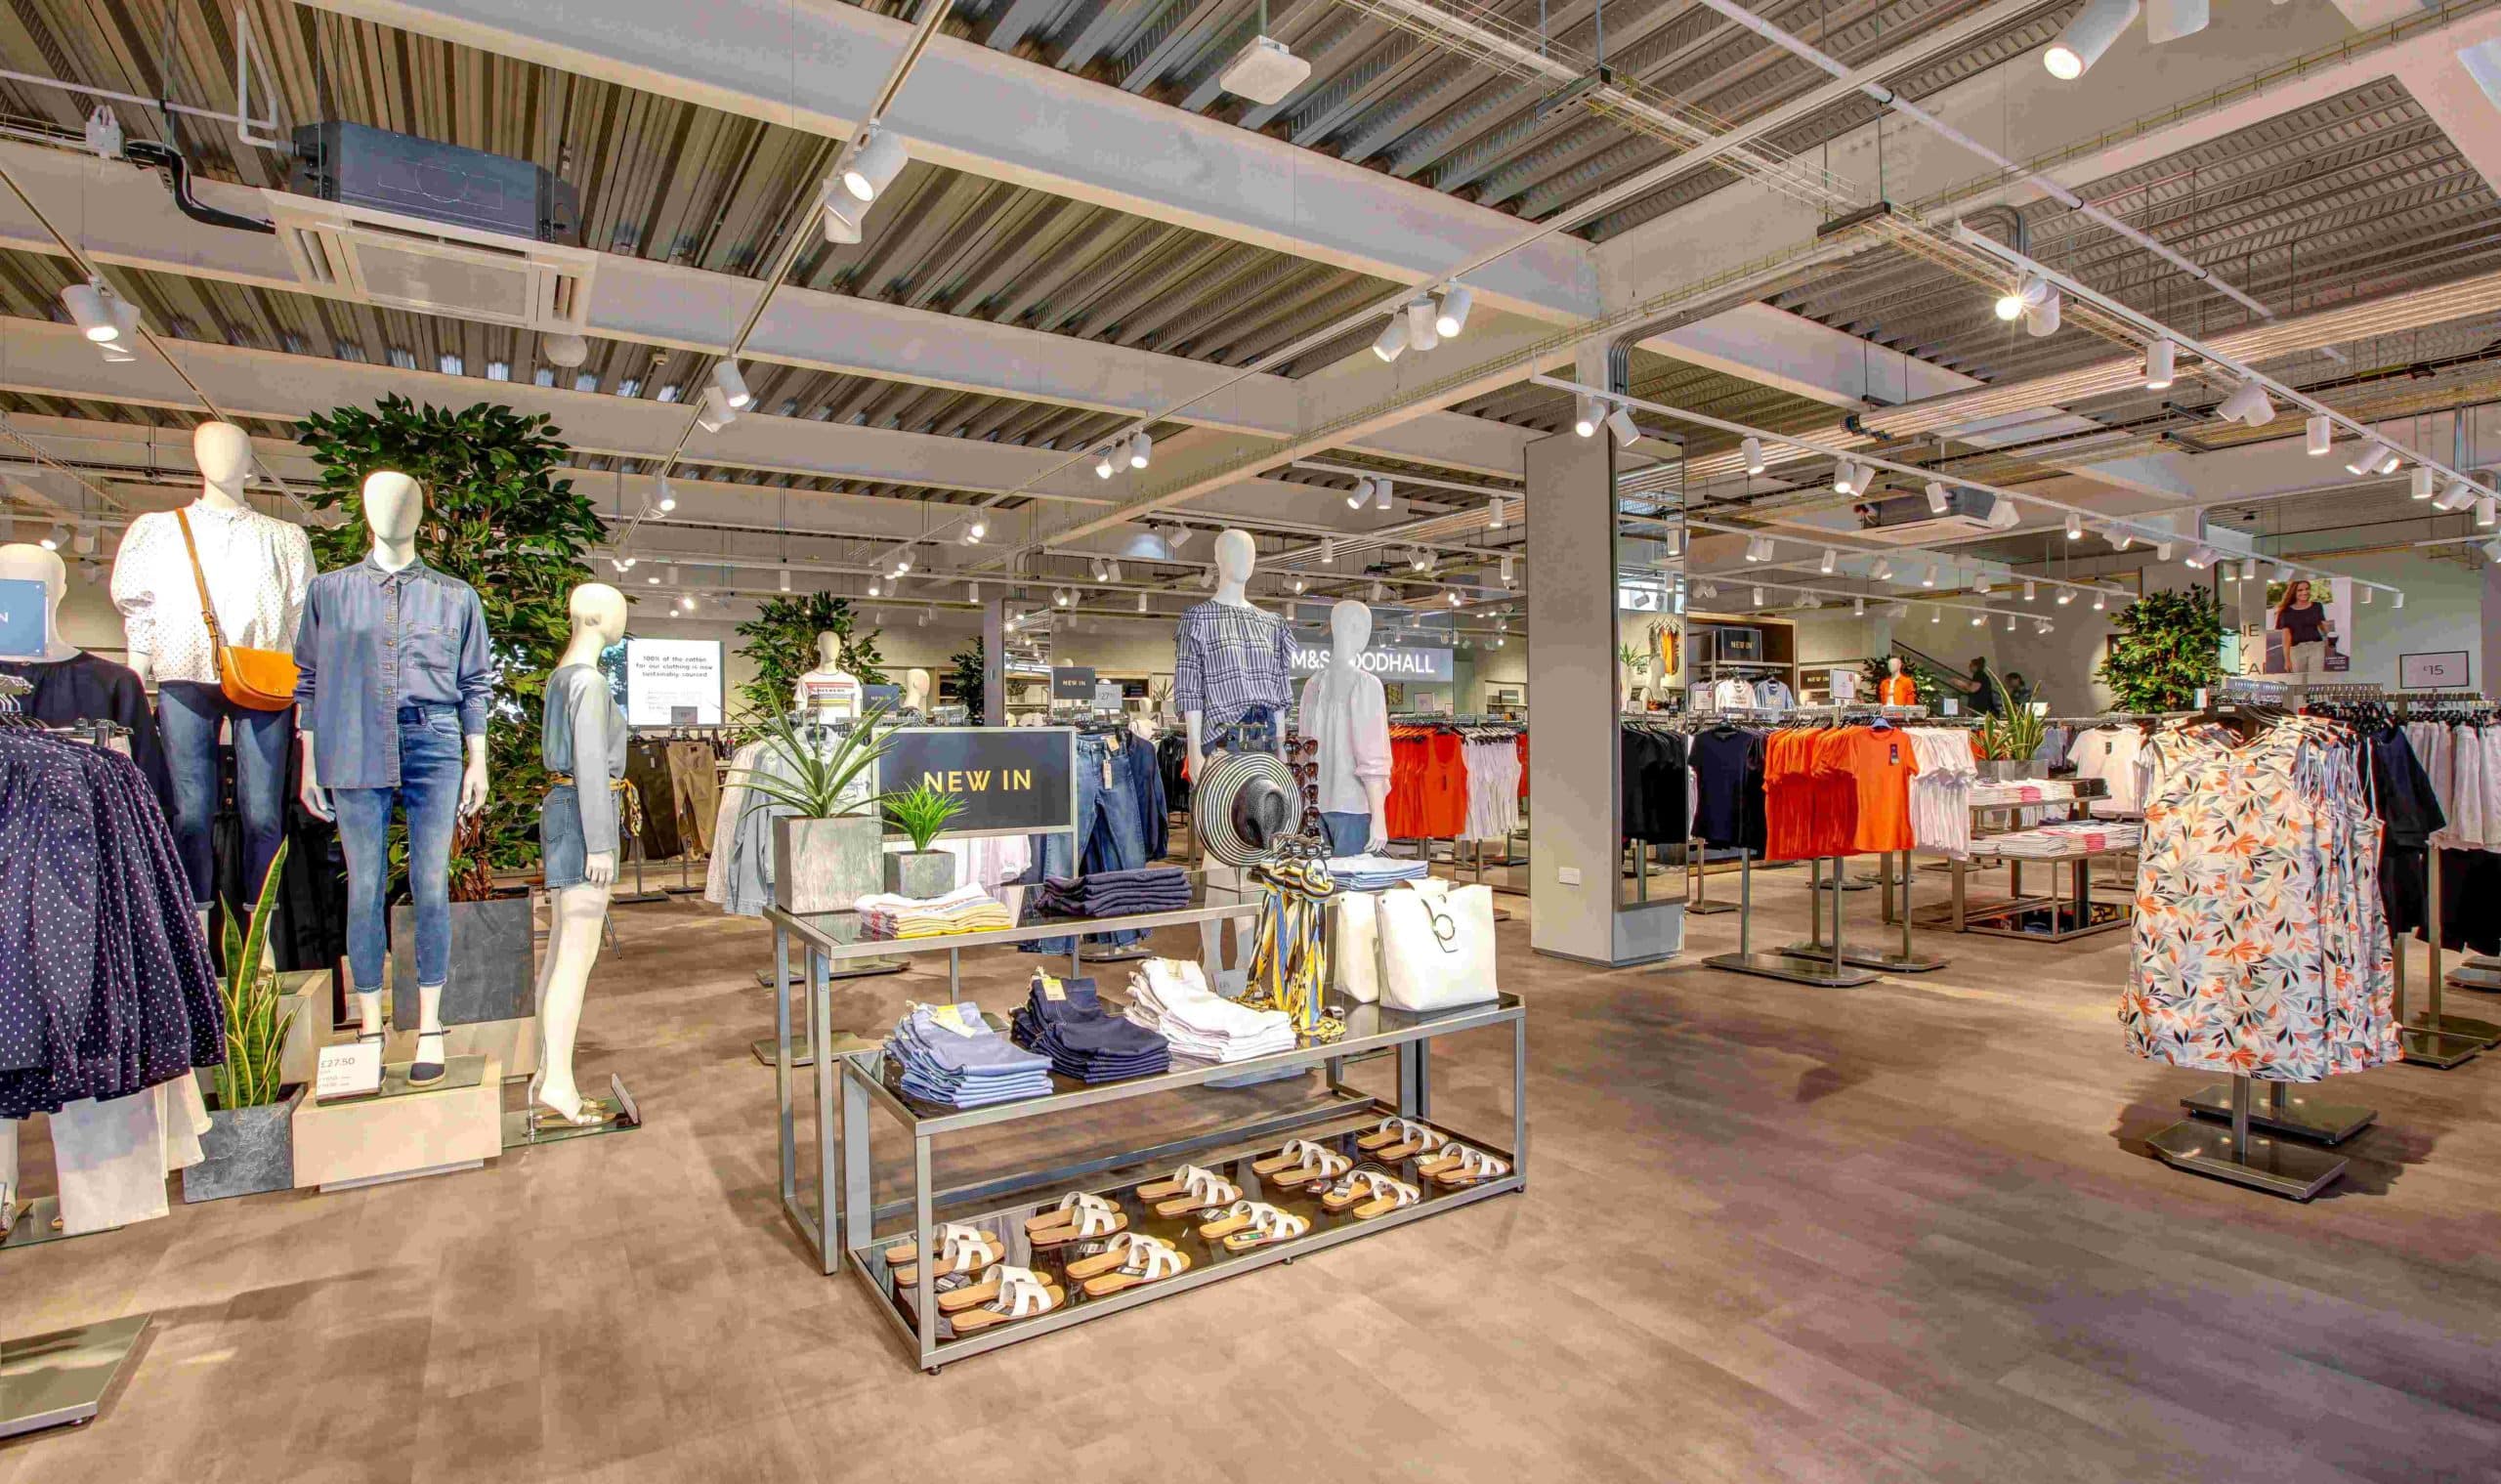 Back-to-basics at M&S, as focus on core retail principles pays off, 2